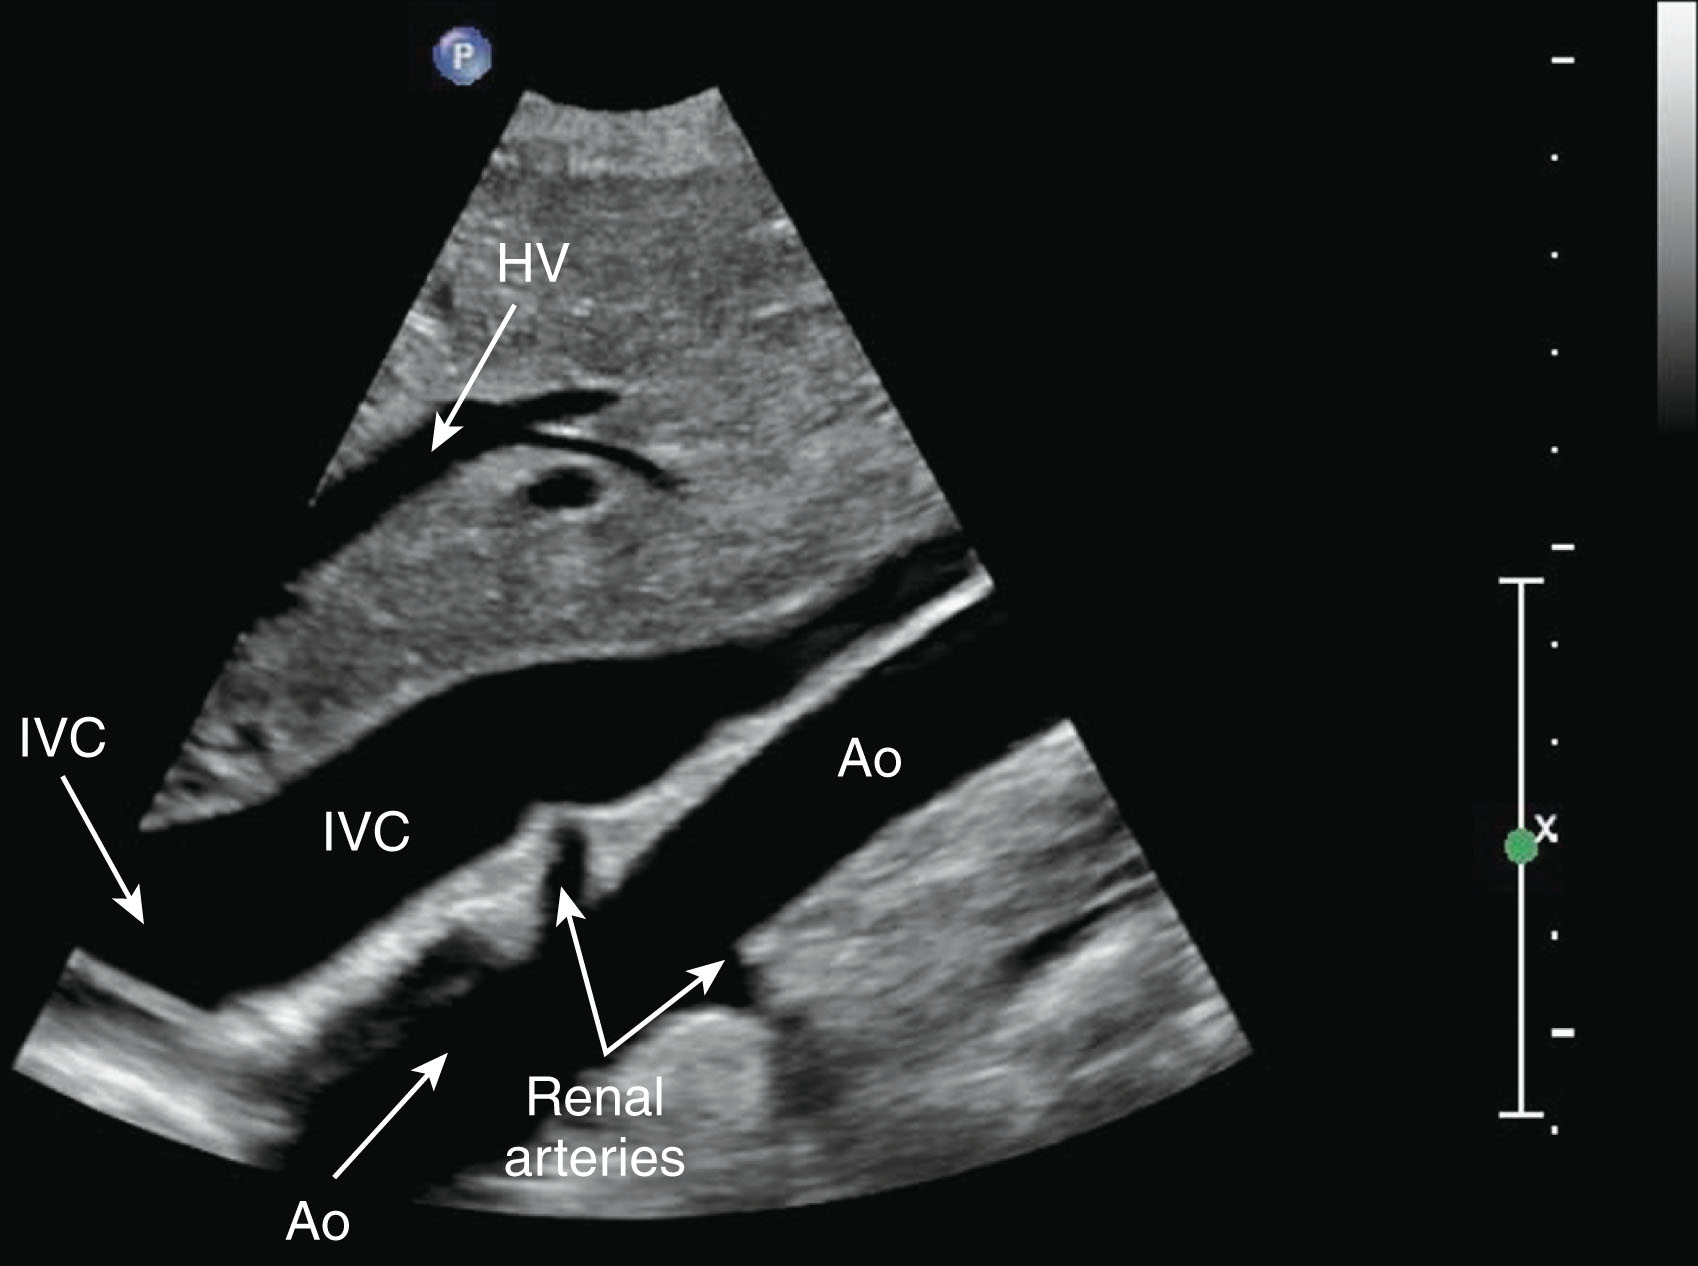 Fig. 8.9, Coronal image with the transducer slightly angled toward the midline to see the inferior vena cava (IVC) anterior to the aorta (Ao) and renal arteries. HV , Hepatic vein.